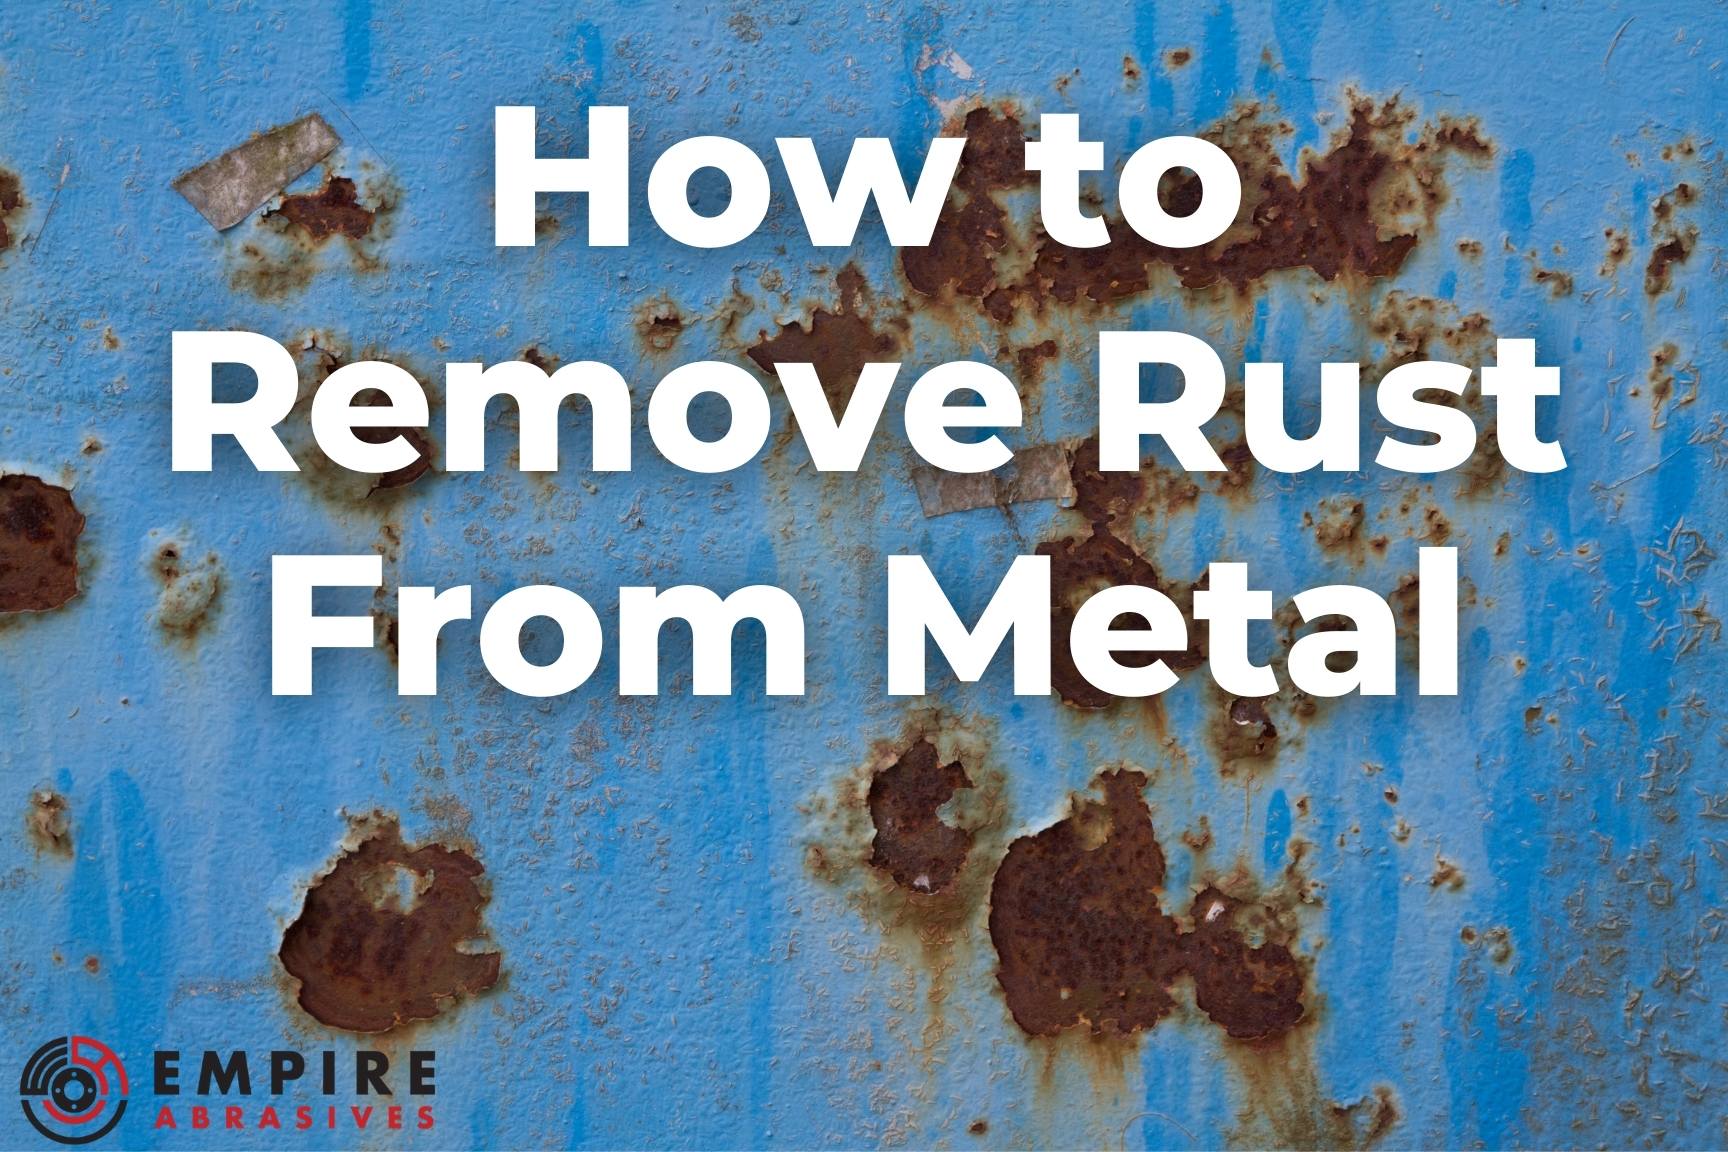 4 Ways to Get Rust Off a Knife